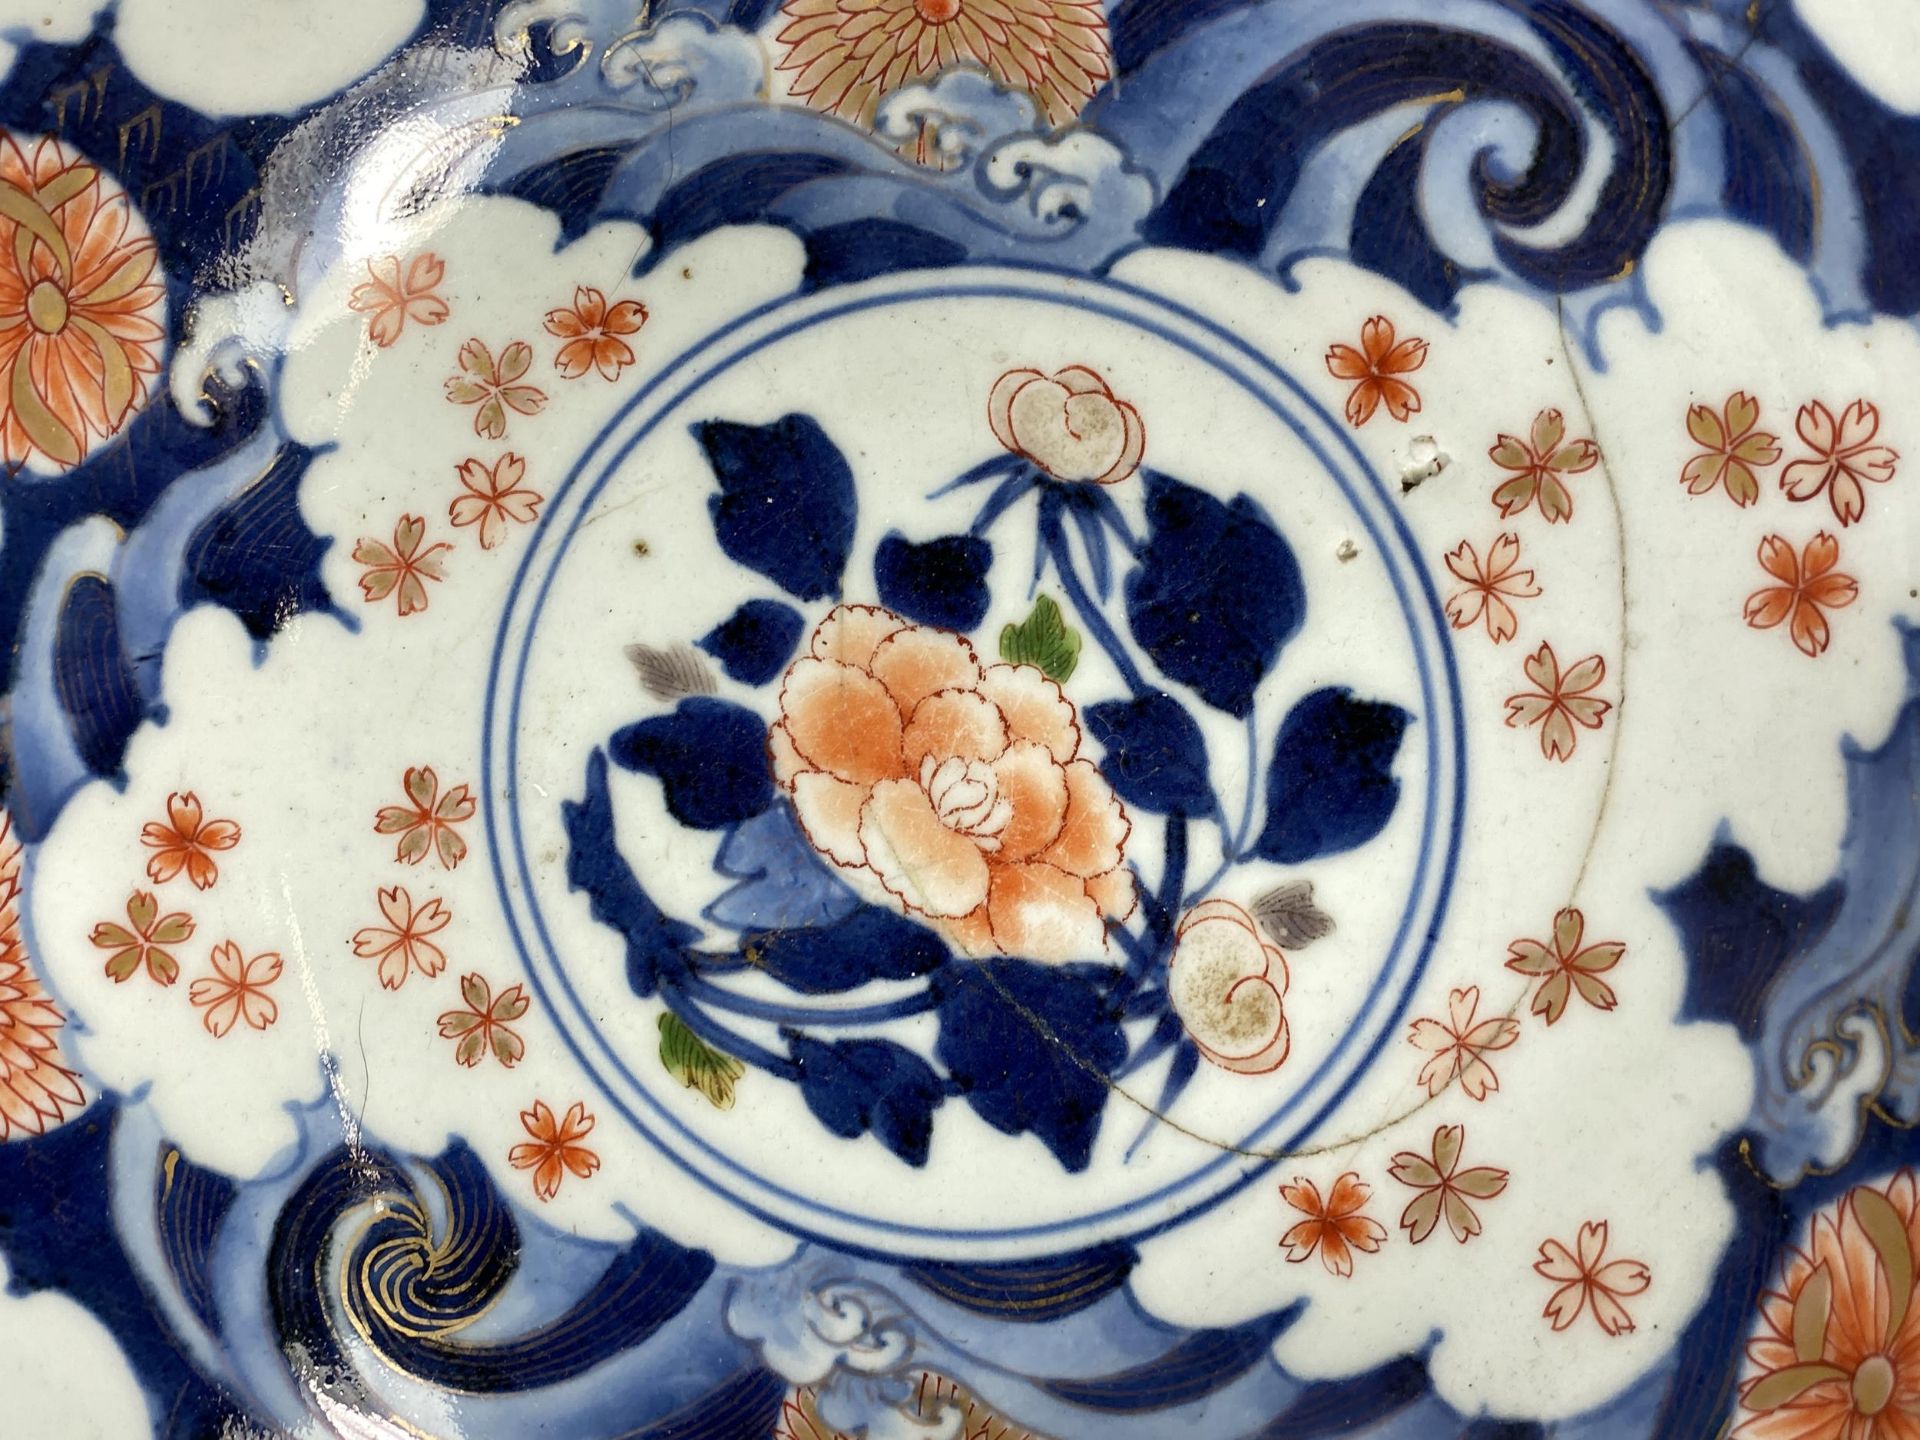 A LARGE JAPANESE MEIJI PERIOD (1868-1912) IMARI PORCELAIN FRUIT BOWL, FLORAL AND DOUBLE RING MARK TO - Image 5 of 9